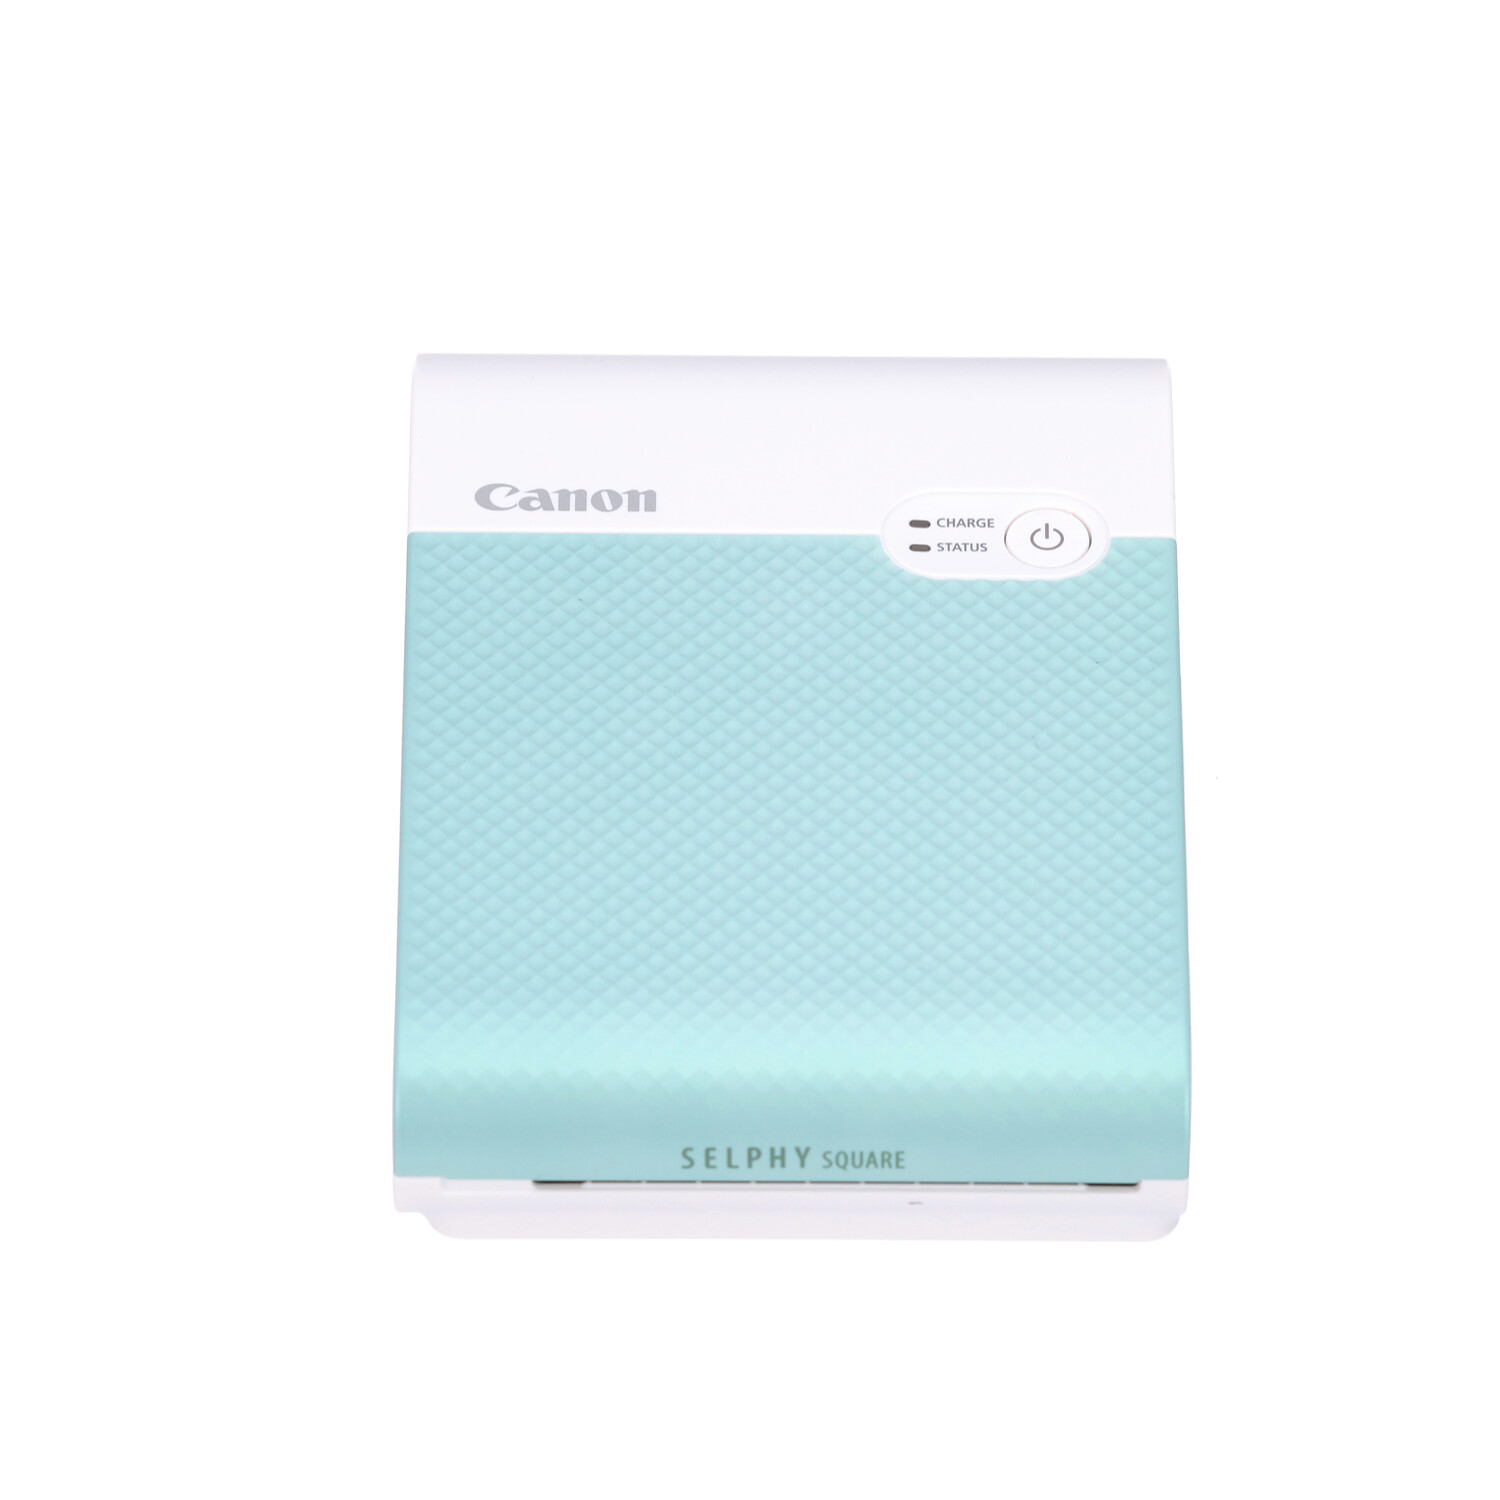 Midwest Photo Canon SELPHY Square QX10 Compact Photo Printer - Green